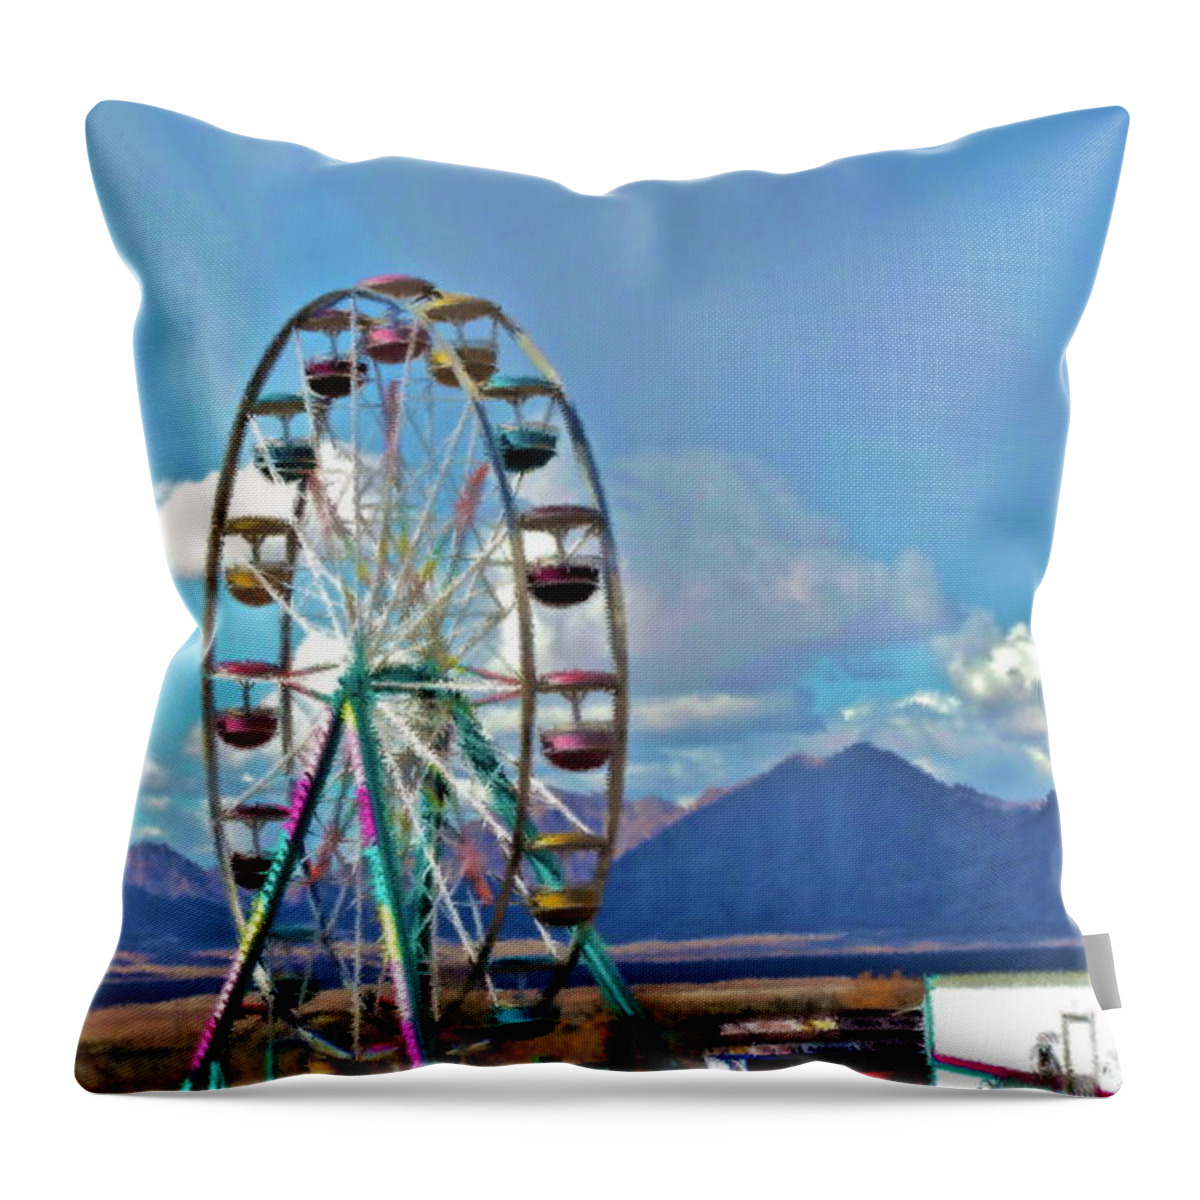 Carnival Throw Pillow featuring the photograph Amusement View by Gwyn Newcombe